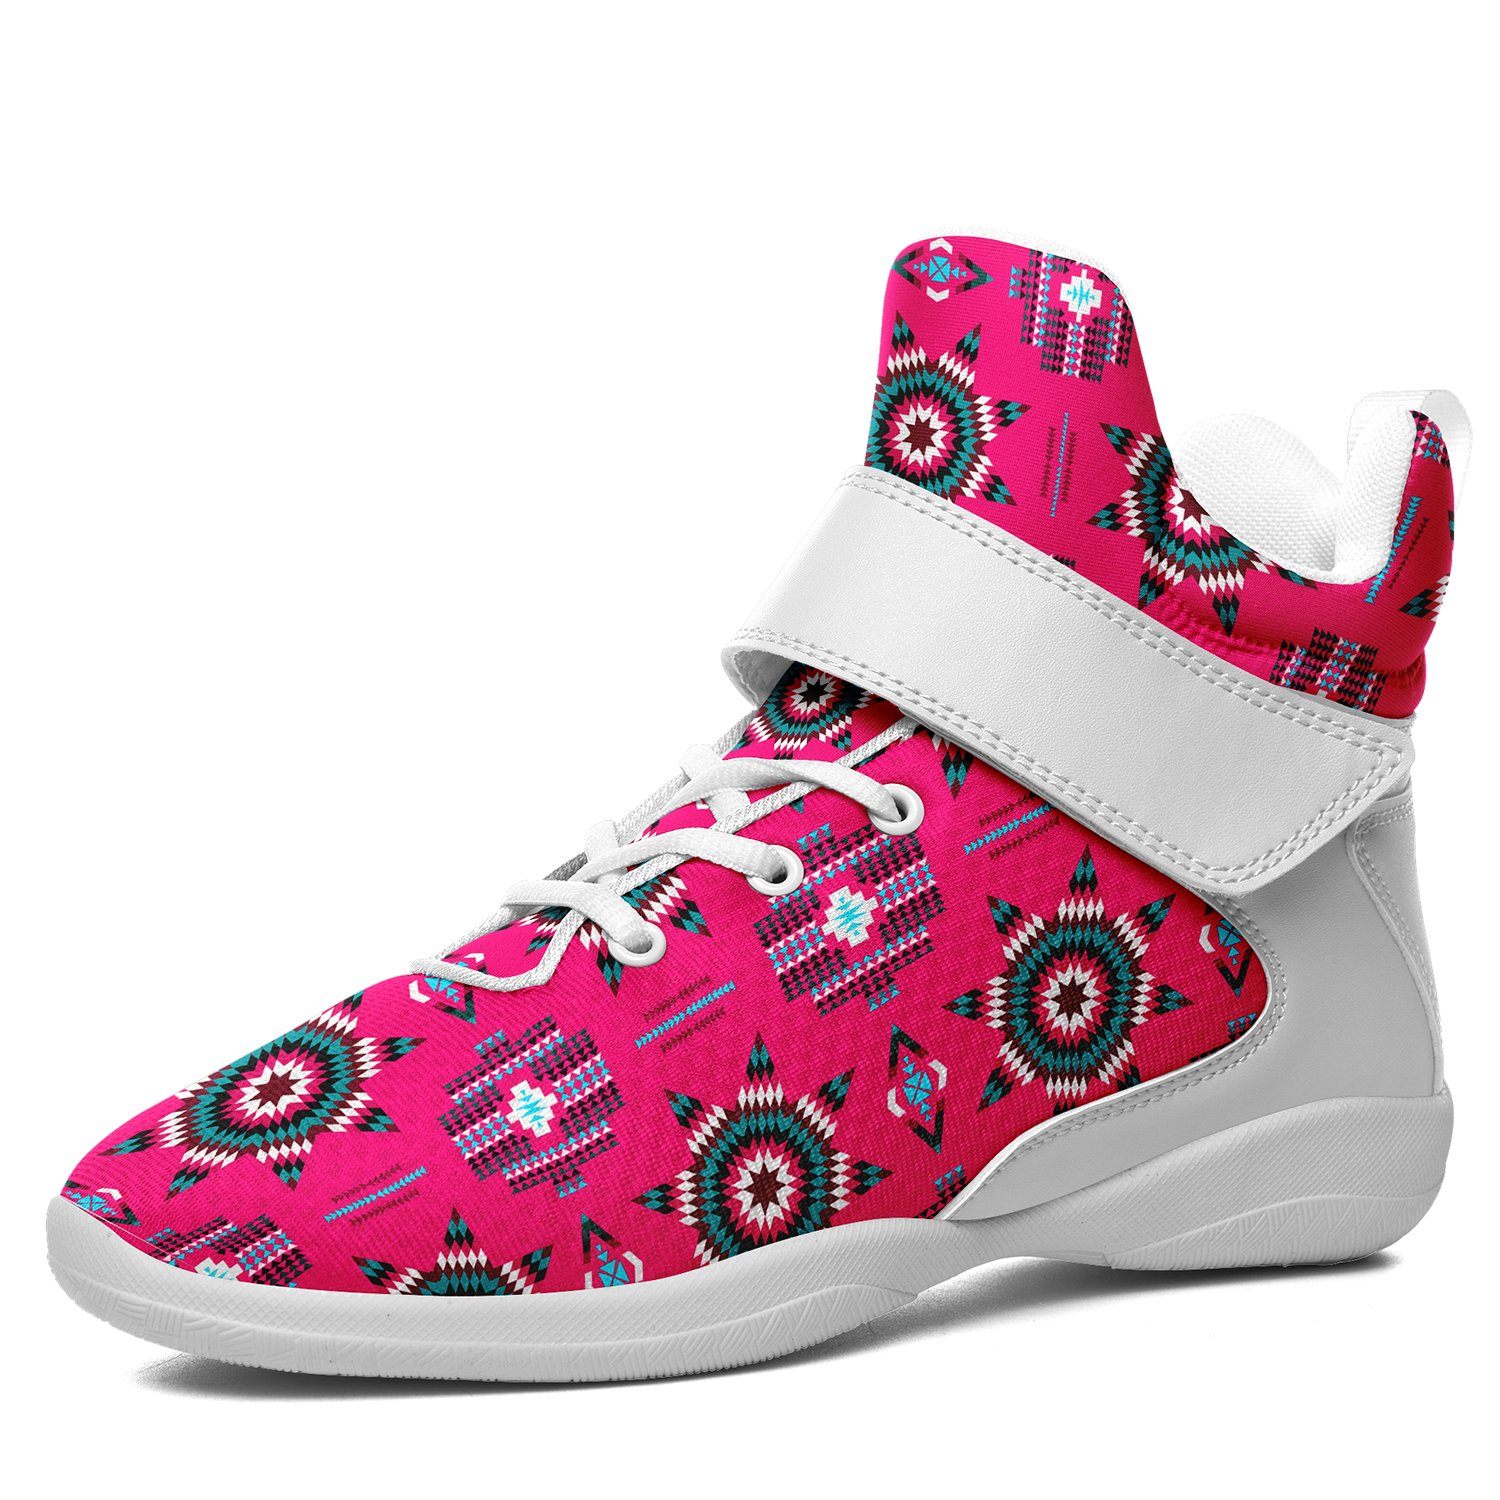 Rising Star Strawberry Moon Ipottaa Basketball / Sport High Top Shoes 49 Dzine US Women 4.5 / US Youth 3.5 / EUR 35 White Sole with White Strap 